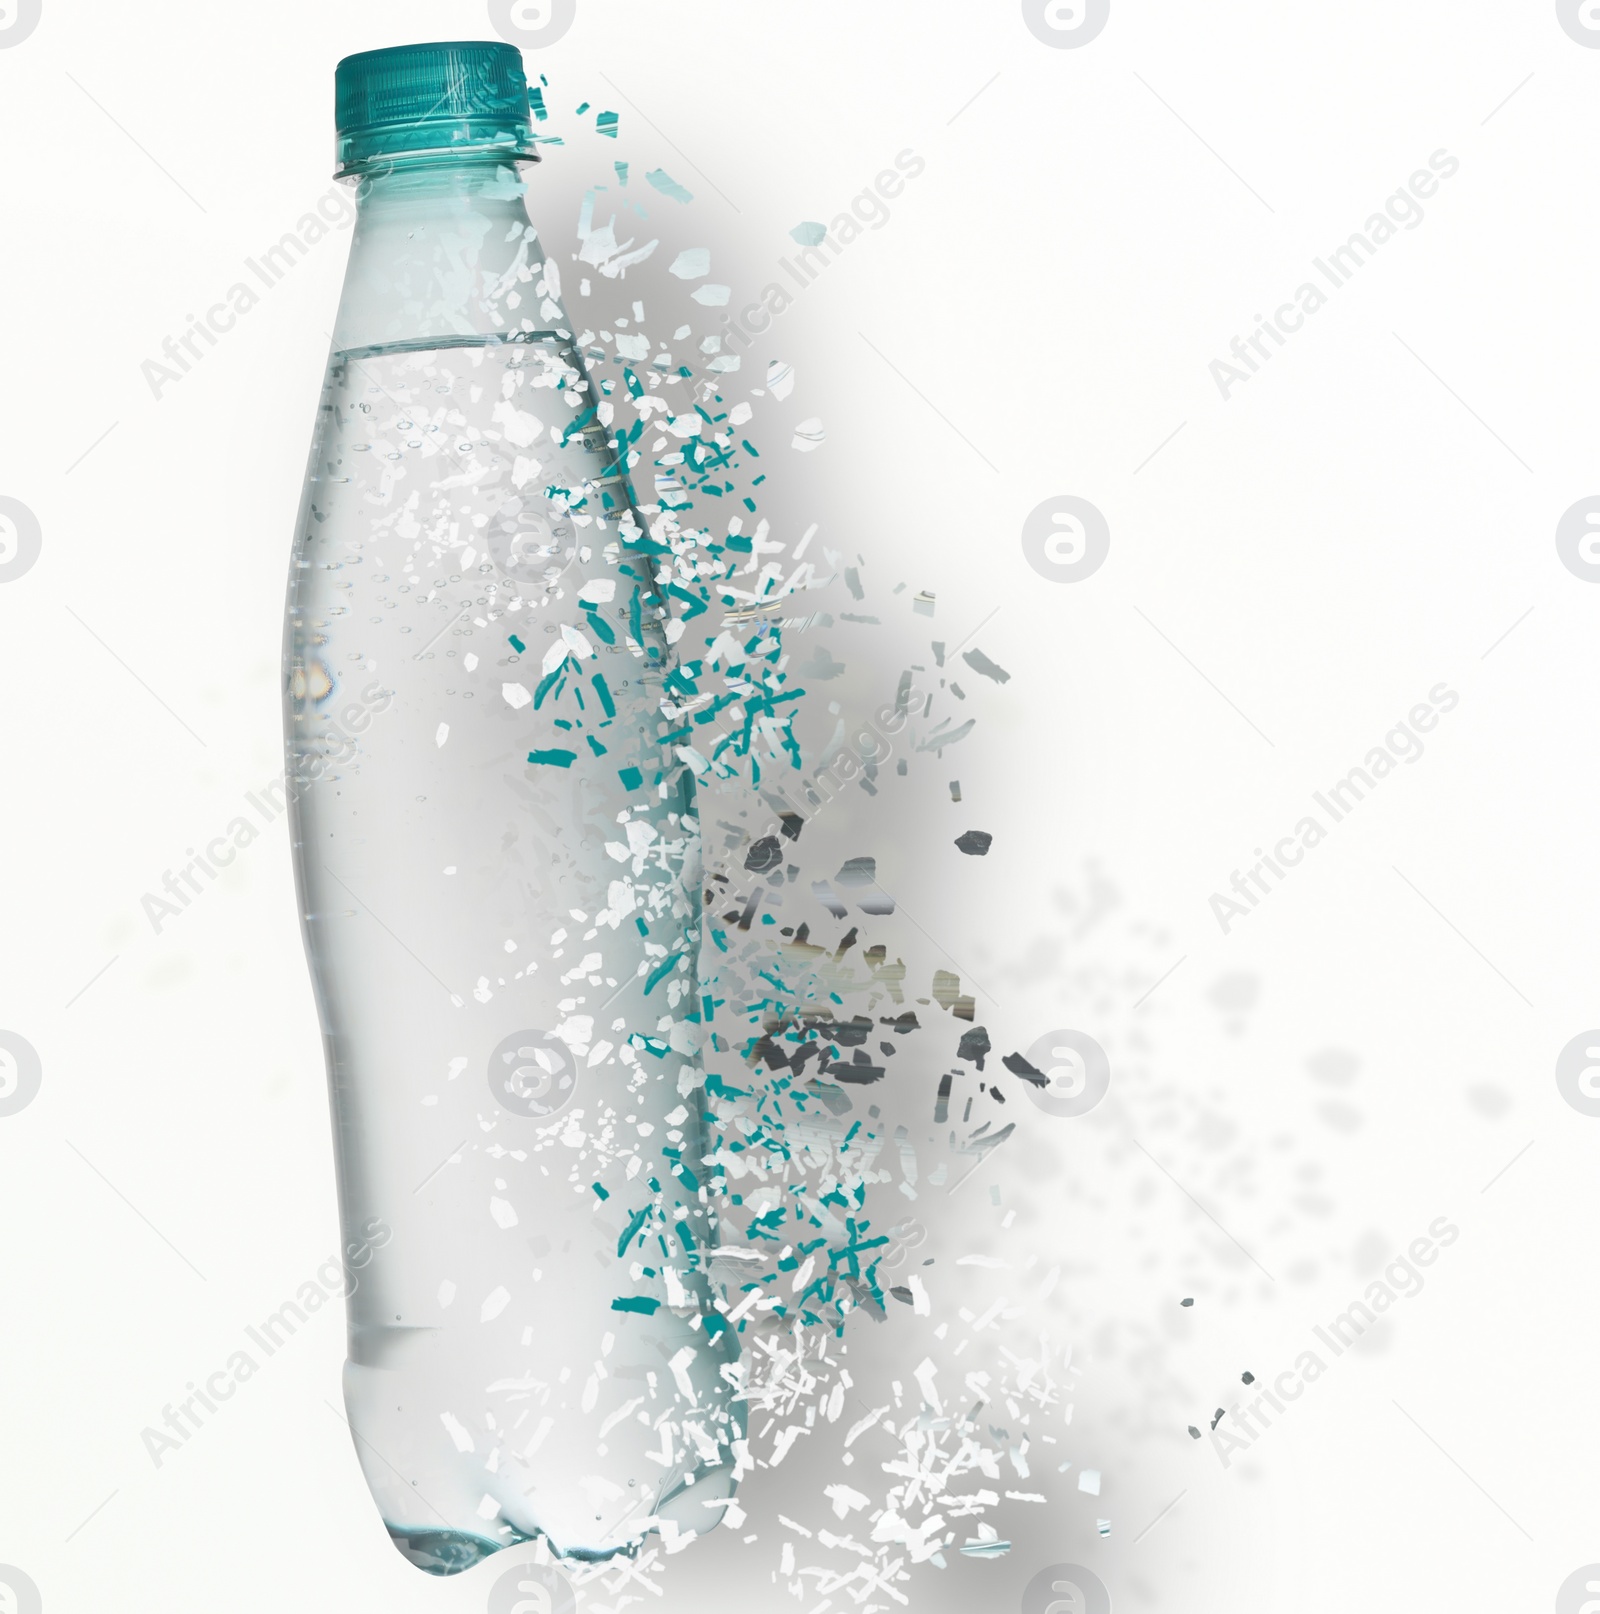 Image of Bottle of water vanishing on white background. Decomposition of plastic pollution